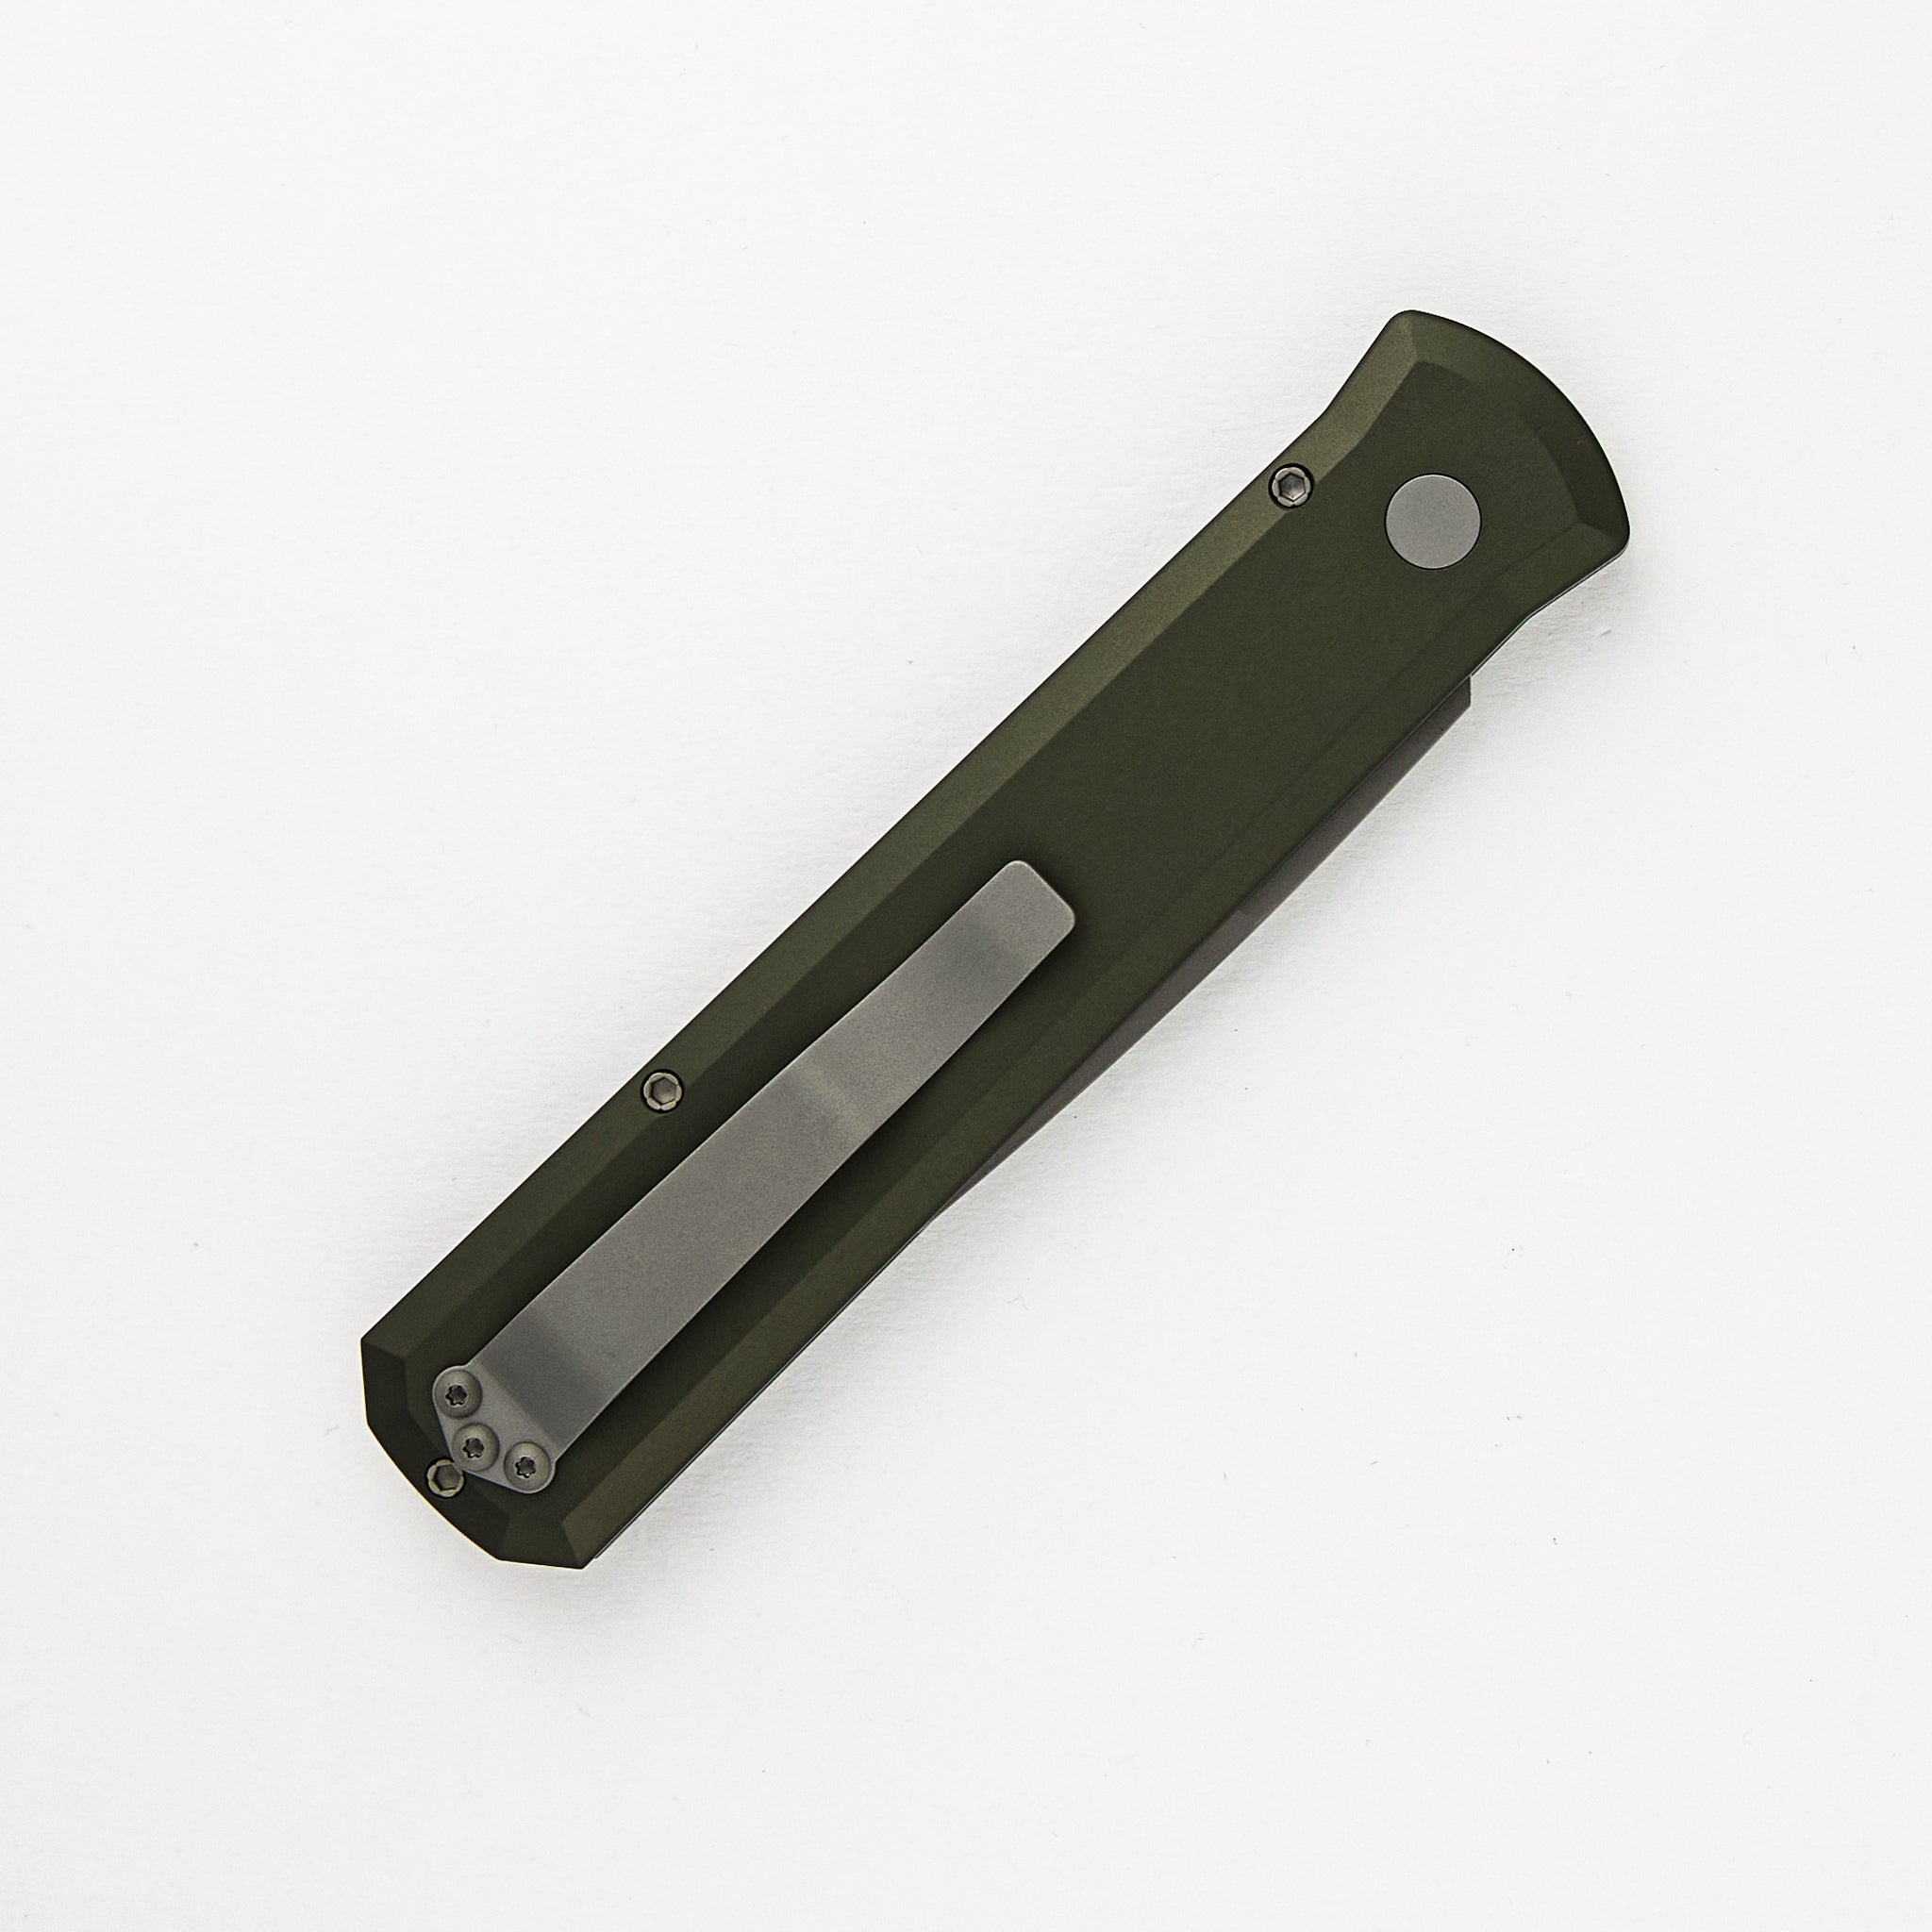 Pro-Tech Knives GODFATHER – Solid Green Handle – Blasted 154CM Plain Edge Blade 920-Green